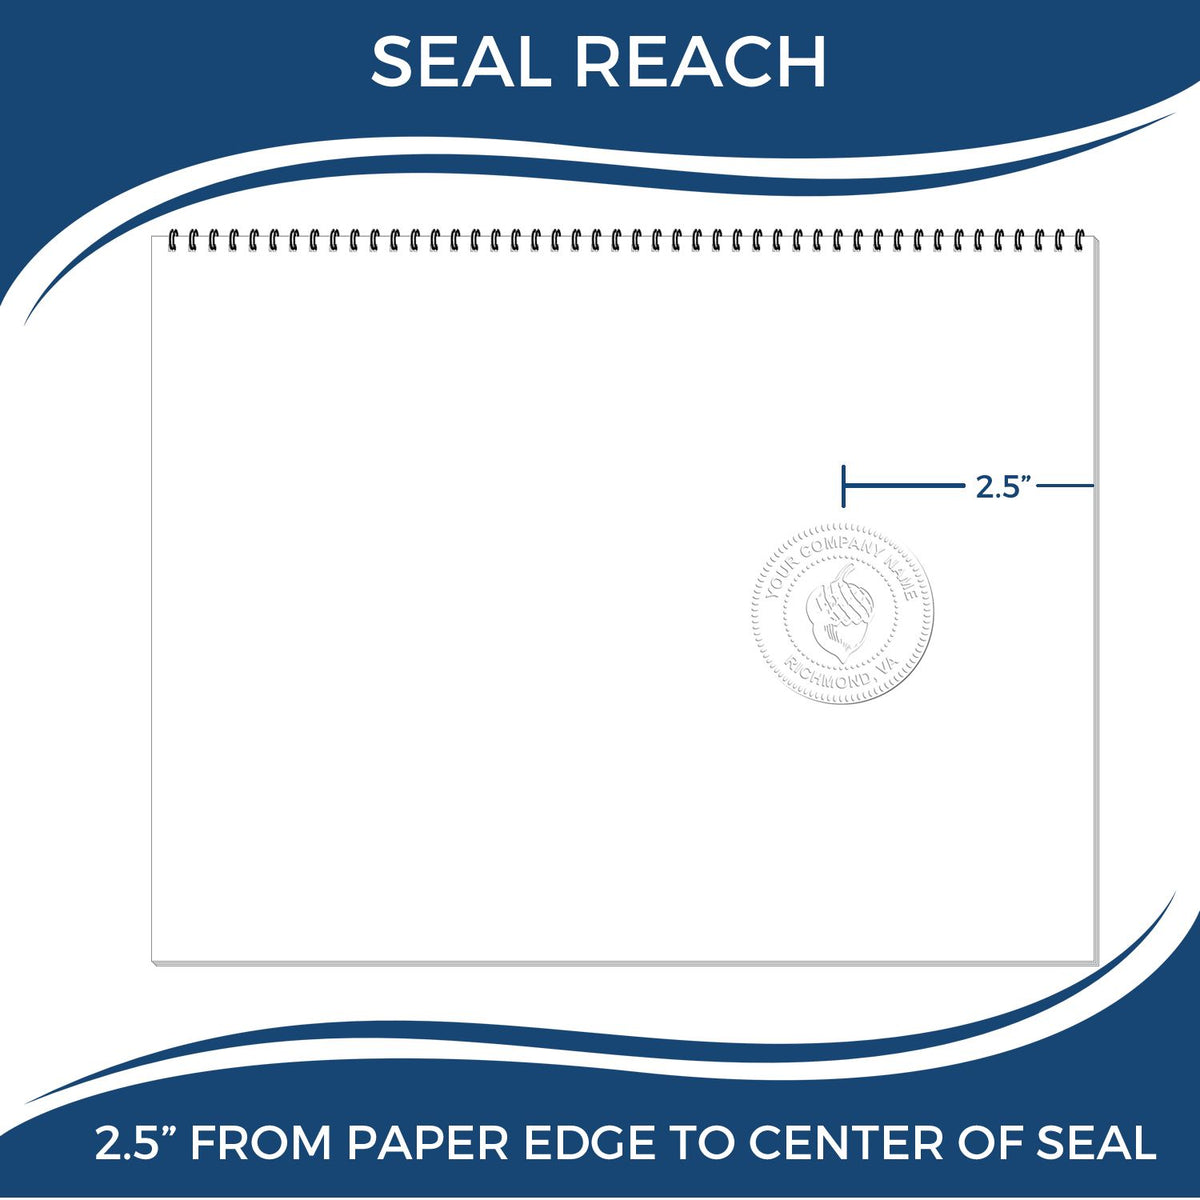 An infographic showing the seal reach which is represented by a ruler and a miniature seal image of the Heavy Duty Cast Iron Kansas Architect Embosser